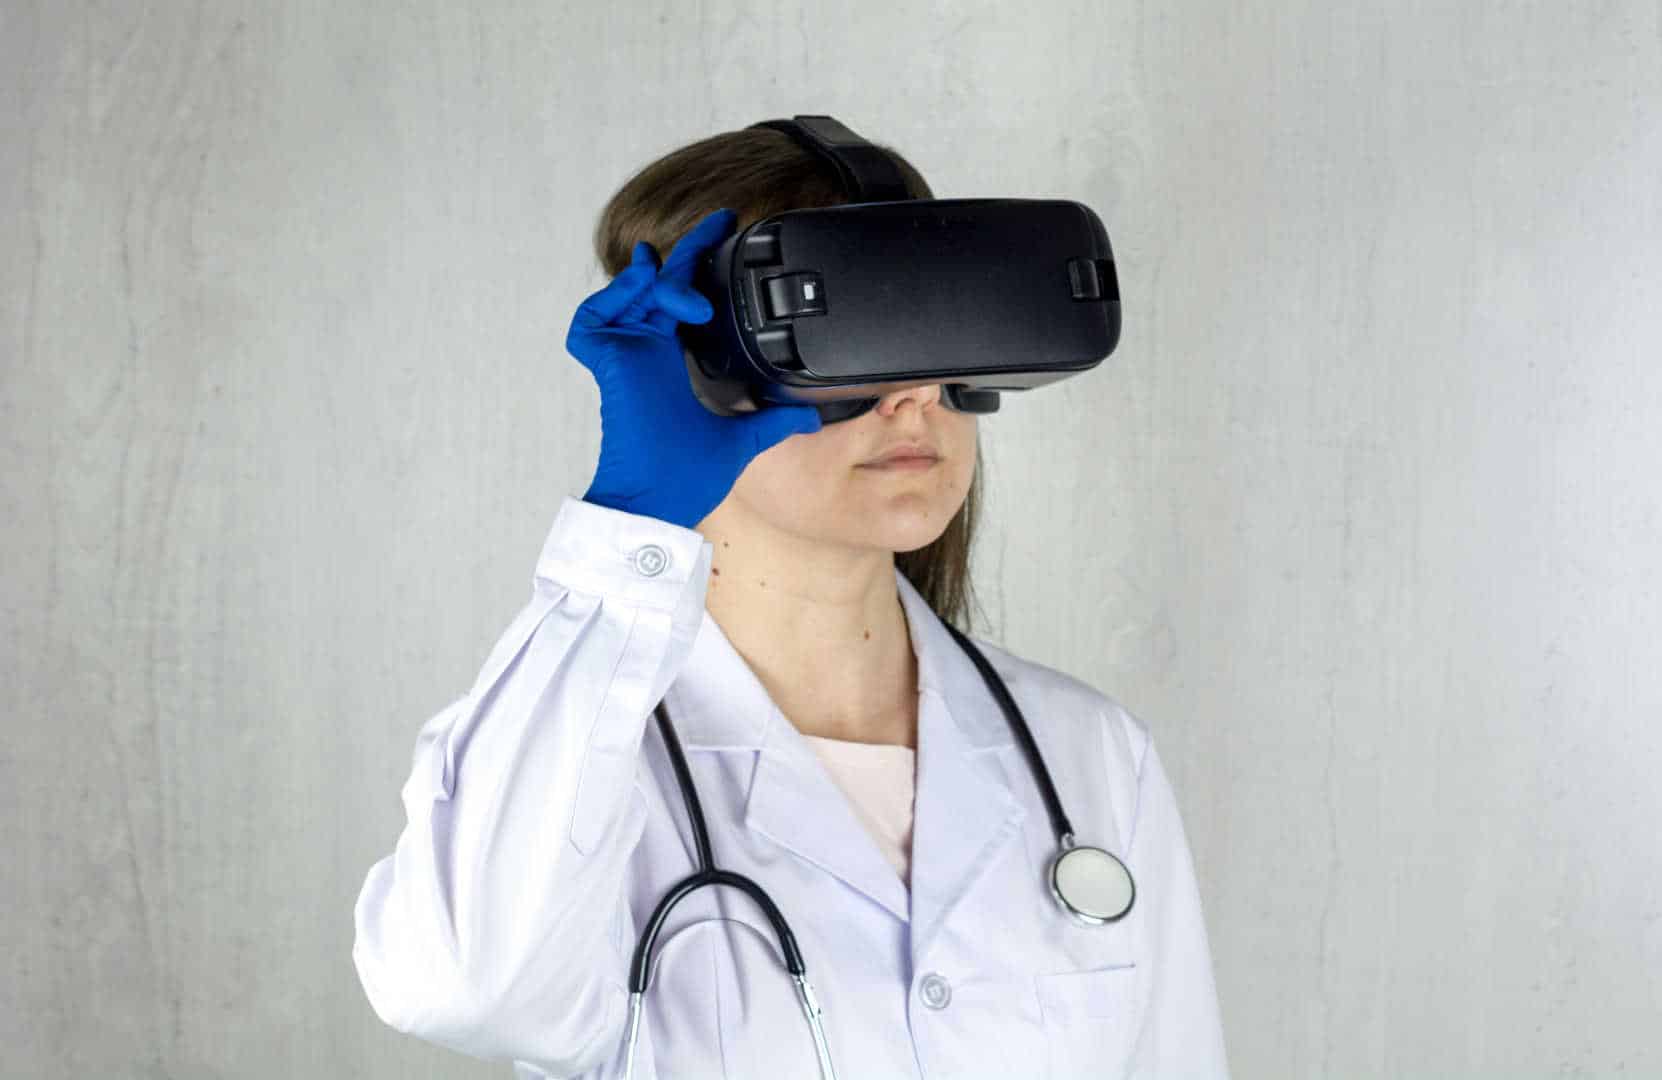 Immersive technologies in surgery